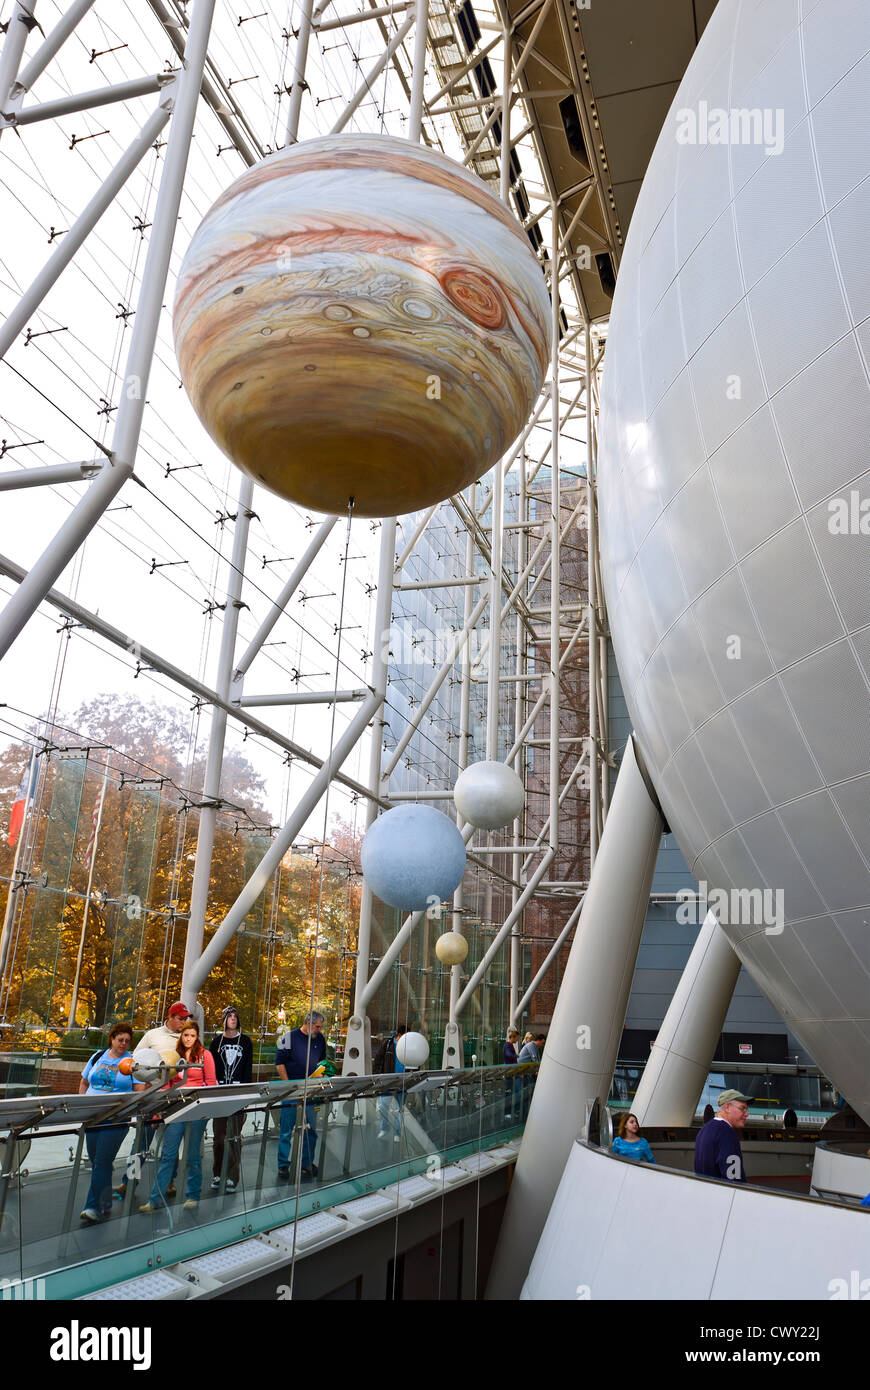 American Museum of Natural History, Rose Center for Earth and Space, Hayden Planetarium in New York City. Stockfoto